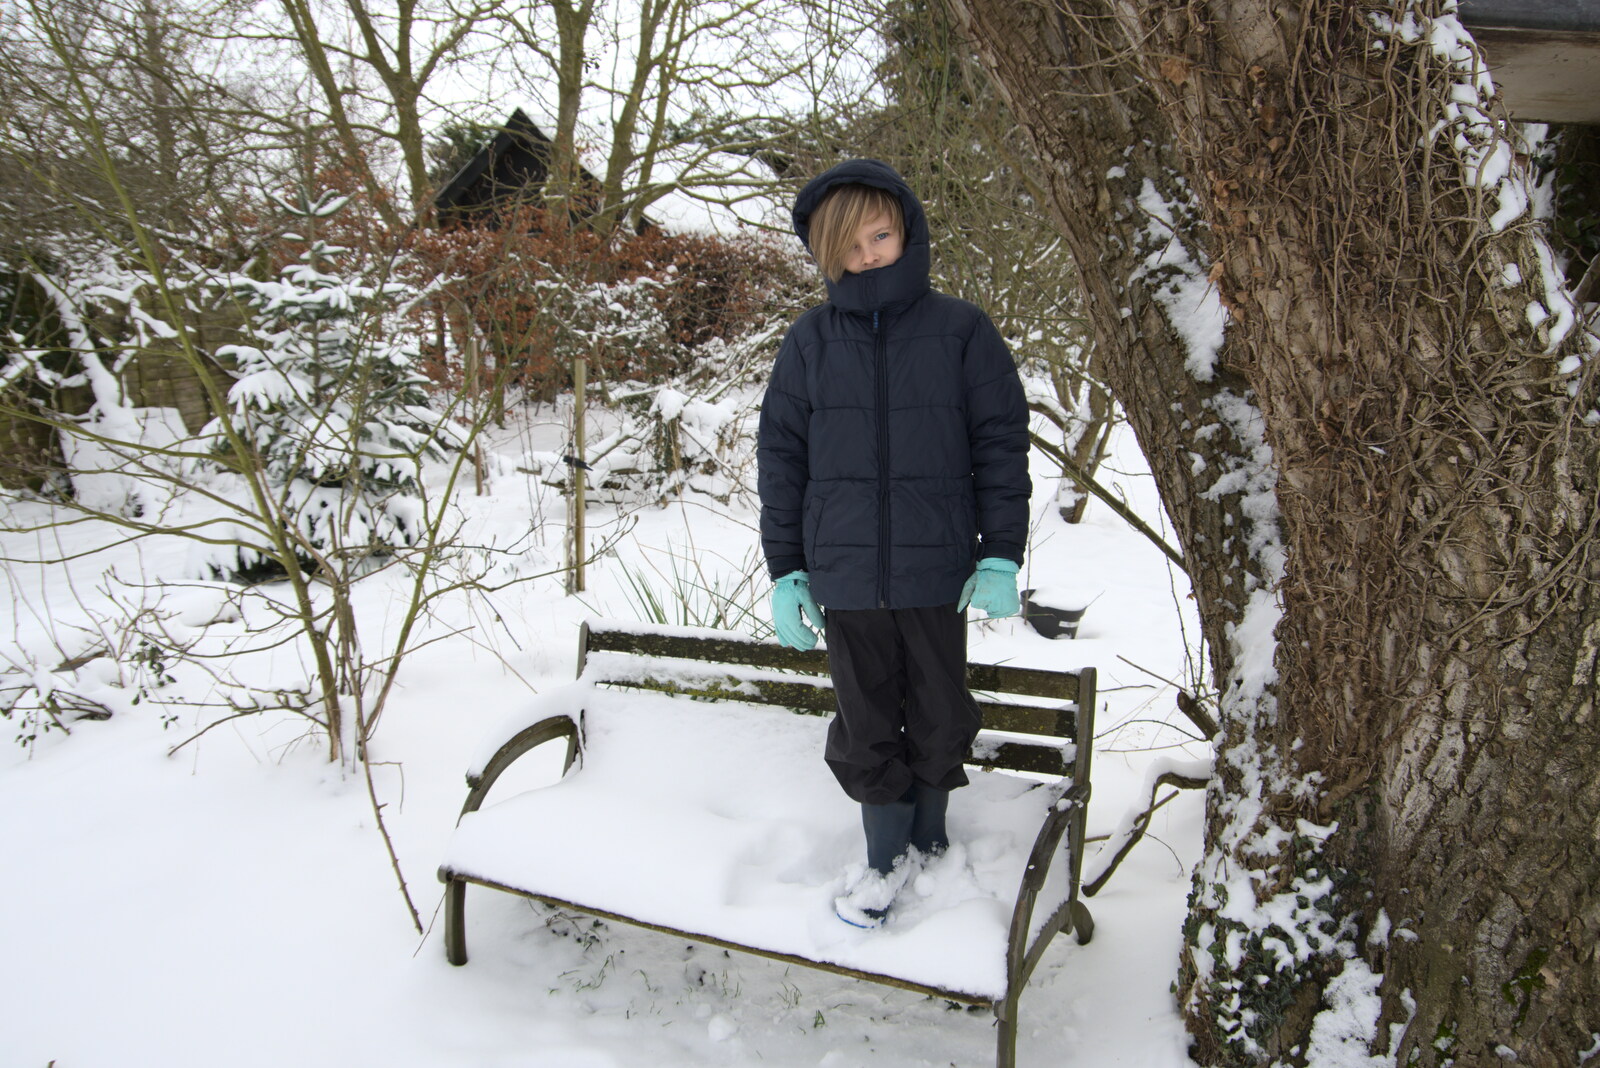 Harry stands on a bench from Beast From The East Two - The Sequel, Brome, Suffolk - 8th February 2021